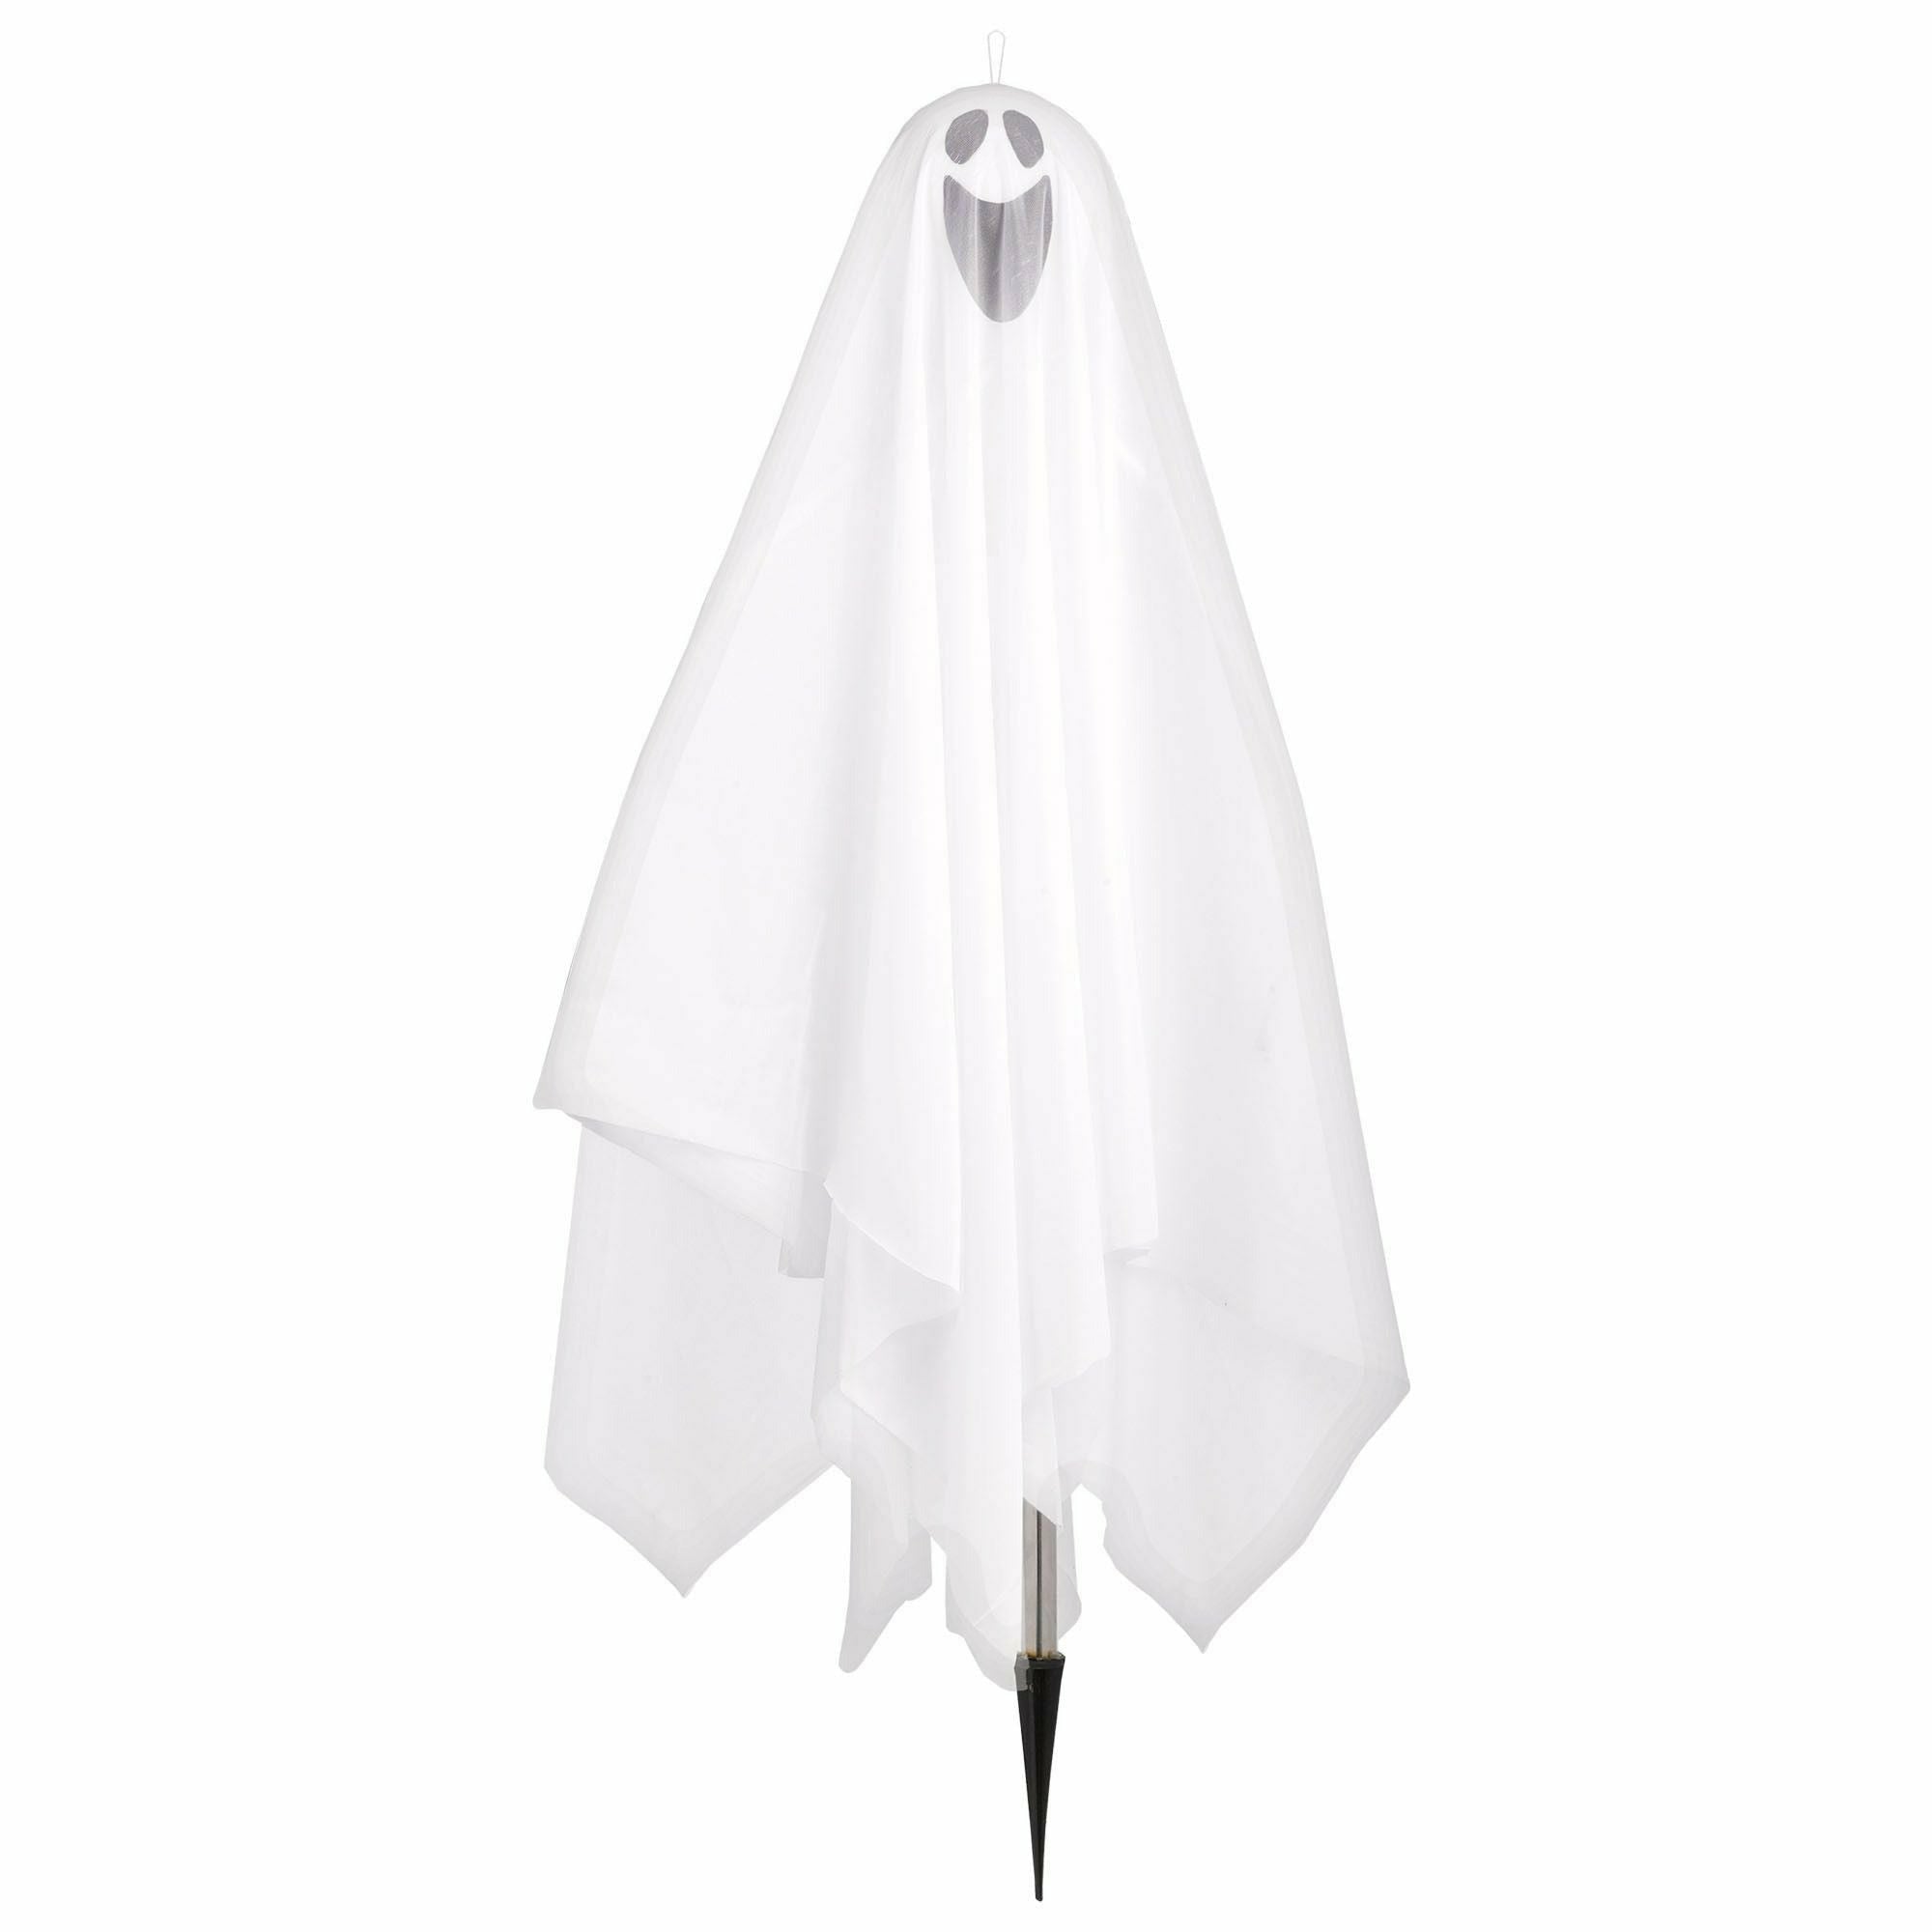 Amscan HOLIDAY: HALLOWEEN Large Fabric Ghost w/ Stake